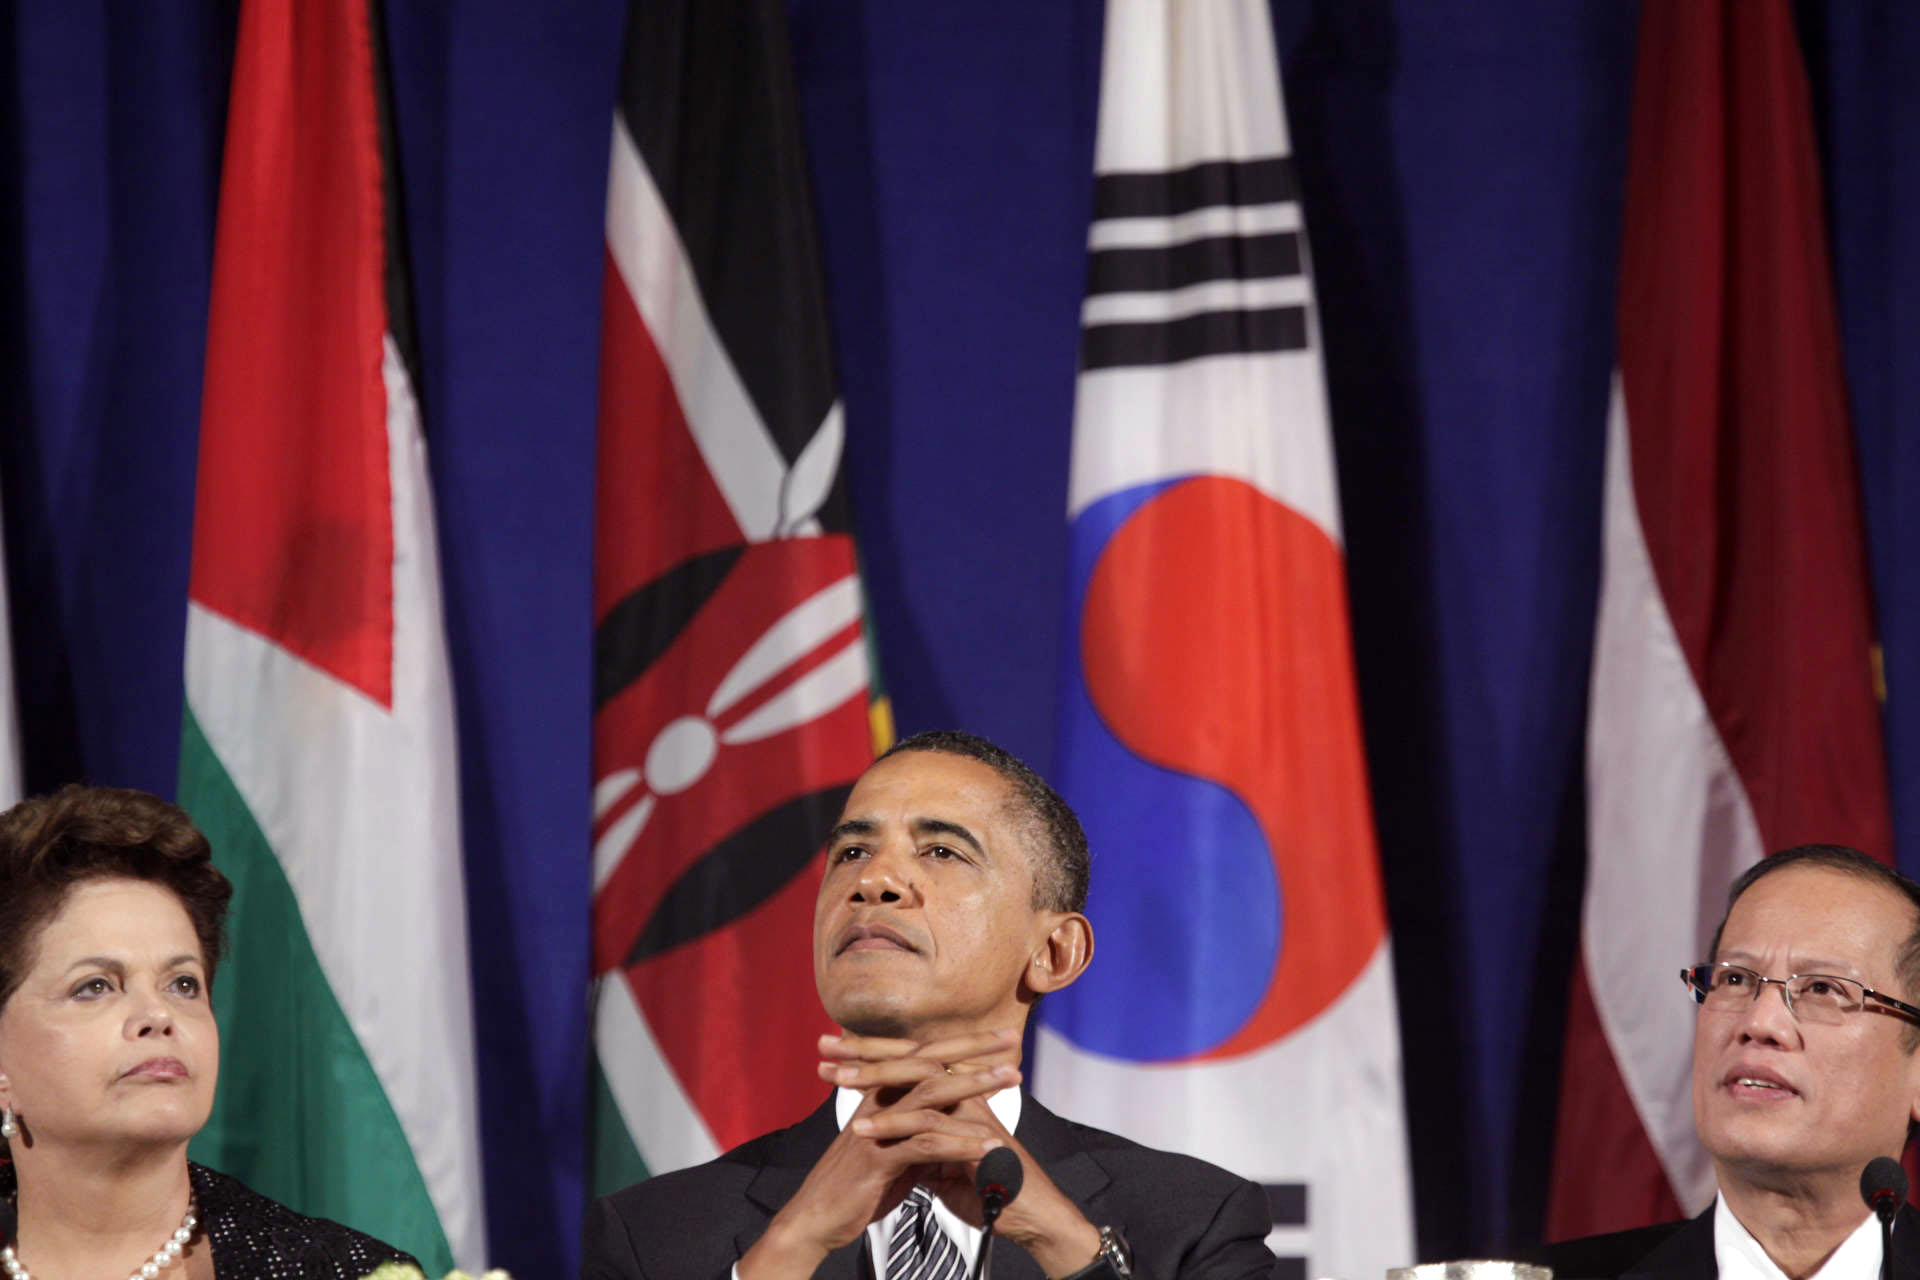 President Barack Obama participates in the Open Government Partnership Event